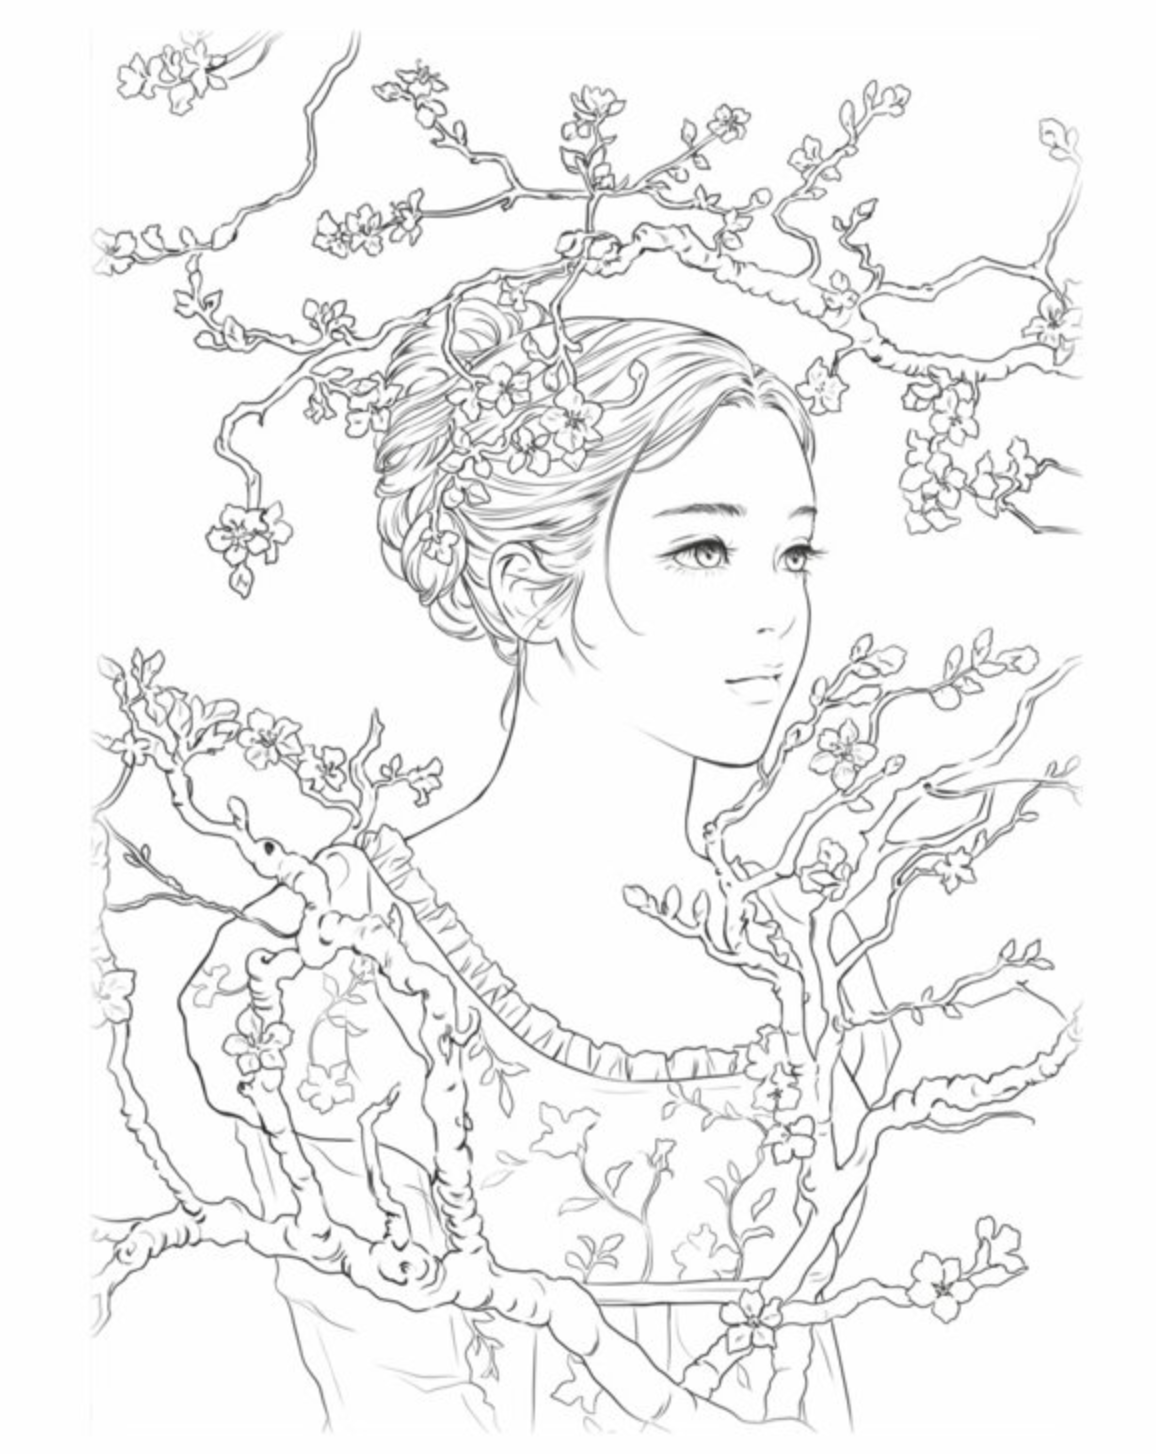 Masterpiece with Girls Coloring Book by Pillow (Jinah Lee) (June 2023) : Coloring book for a girl who fell in love with famous paintings